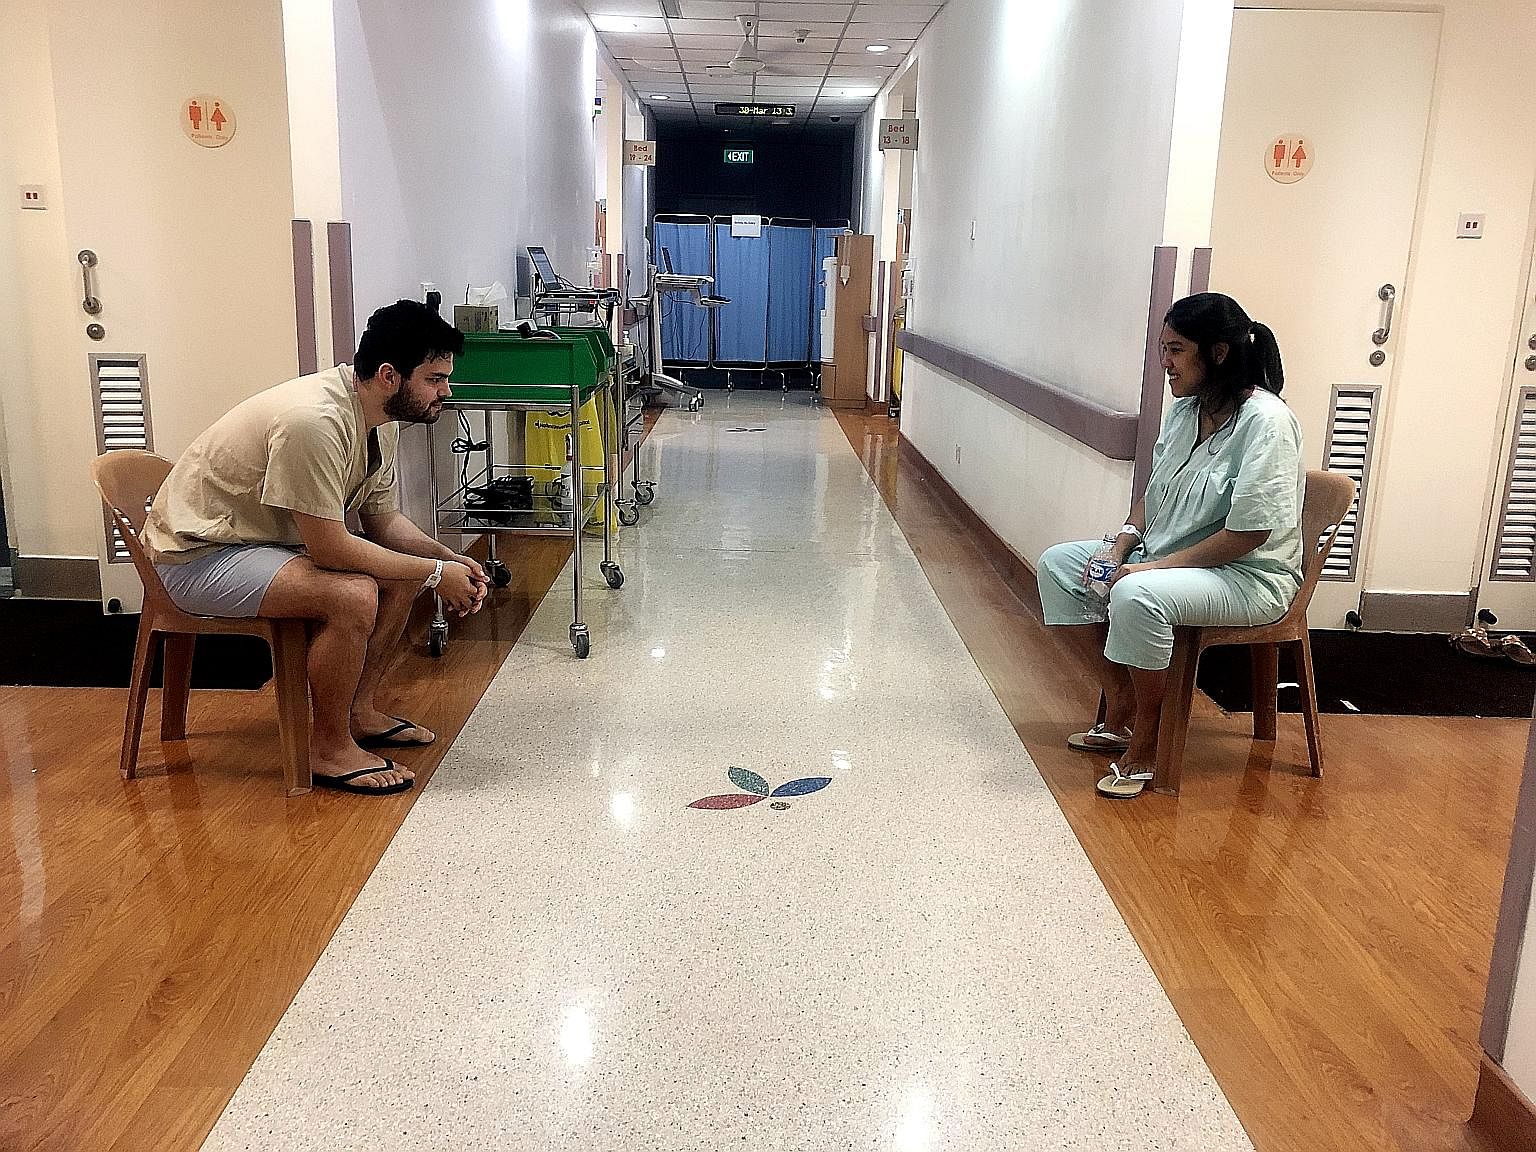 Left: Mrs Natasha Ling and her husband Pele with baby Boaz, who was born on April 26. Below: At the National University Hospital, the couple were in opposite wards separated by a 2m-wide corridor. PHOTOS: MATHEW PEREIRA, PELE LING